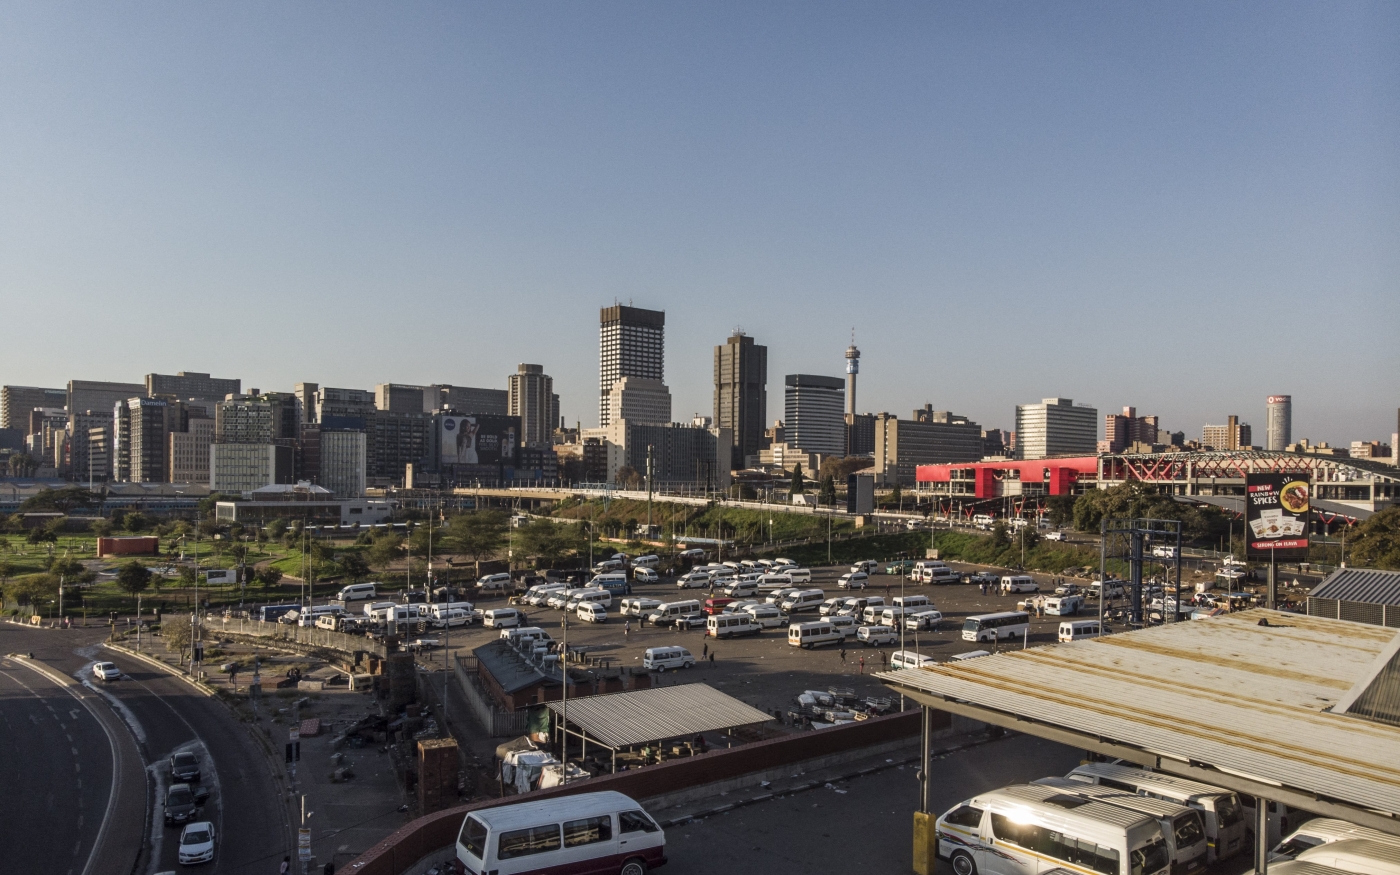 Johannesburg, pictured here, is far behind Dubai as a destination for Africa-focused companies. 7 May 2020 (Marco Longari/AFP)